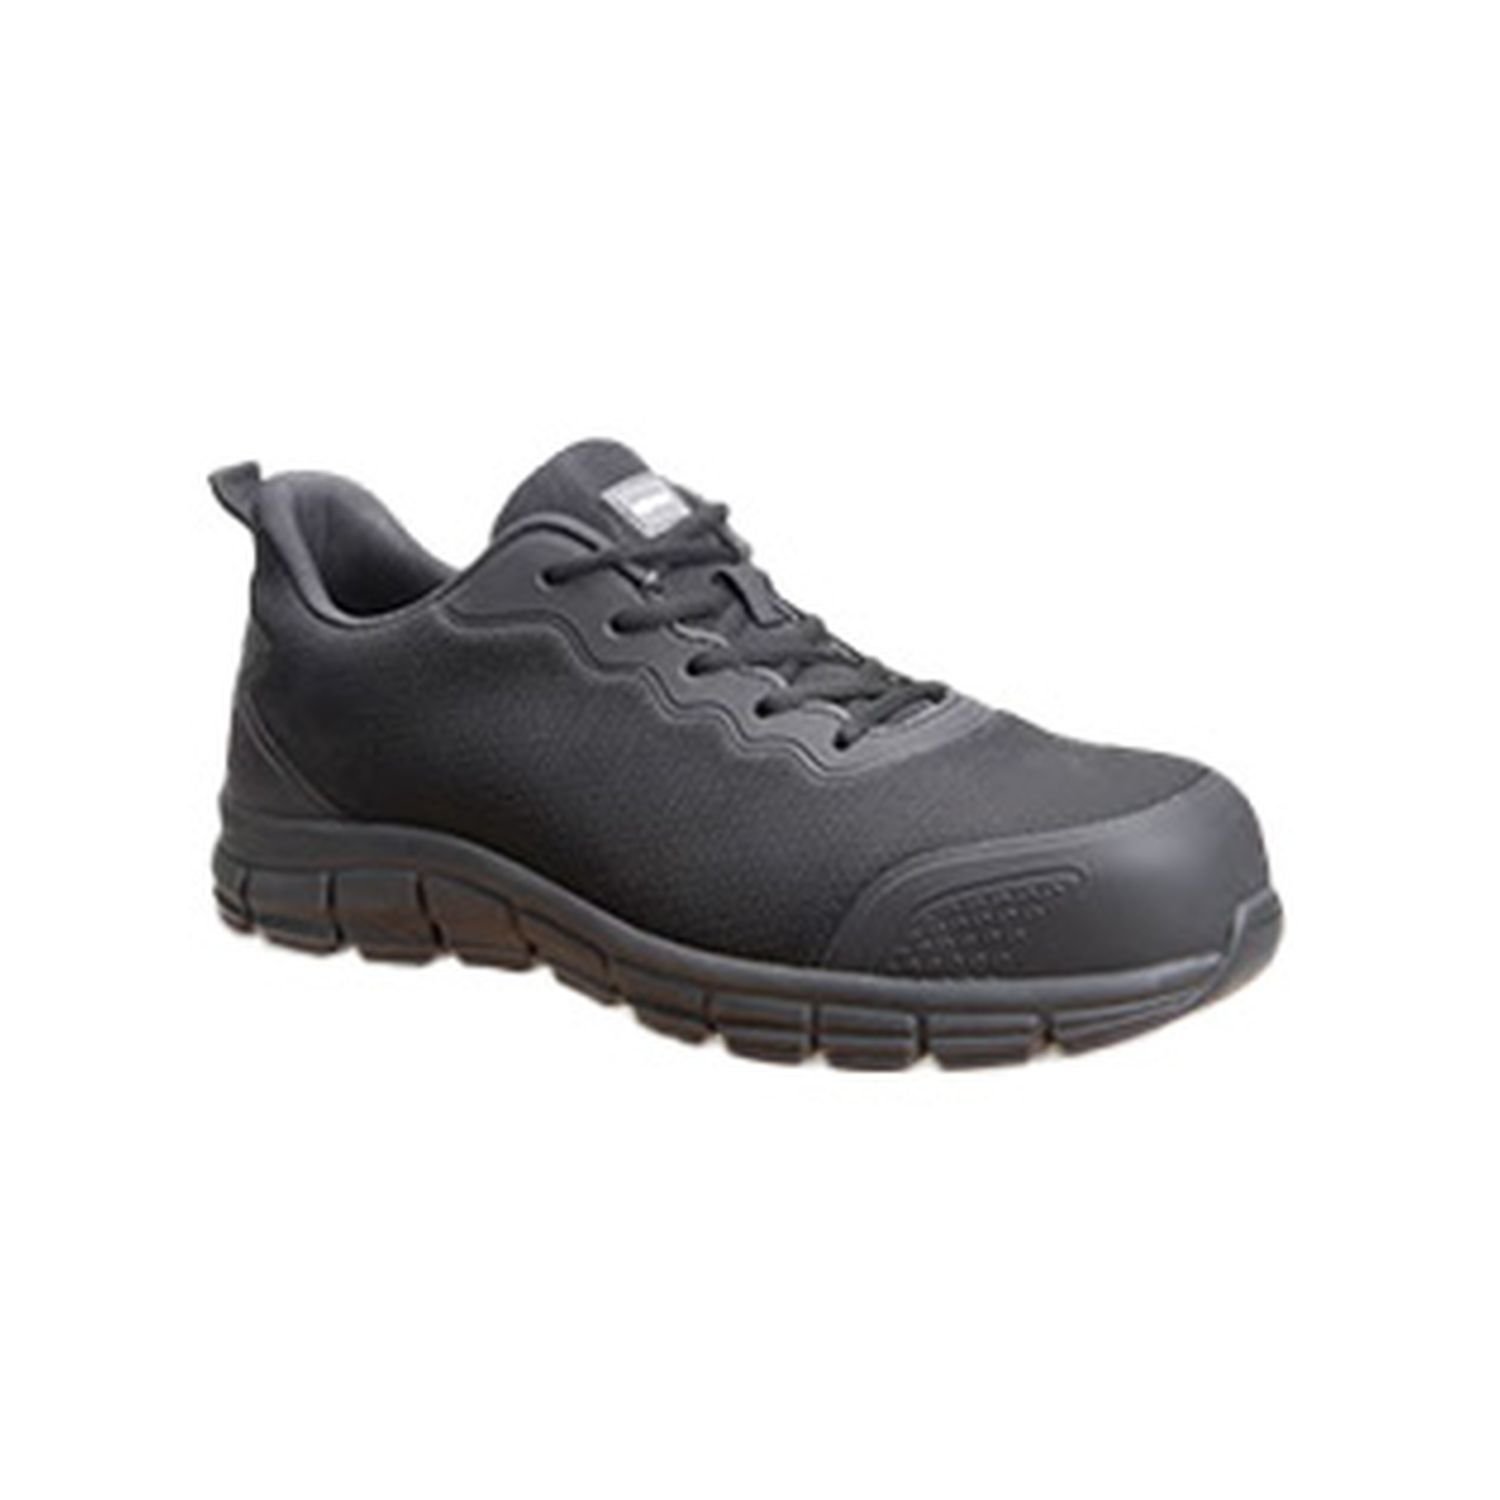 Apex Maui Safety Shoe Recycled Upper Black